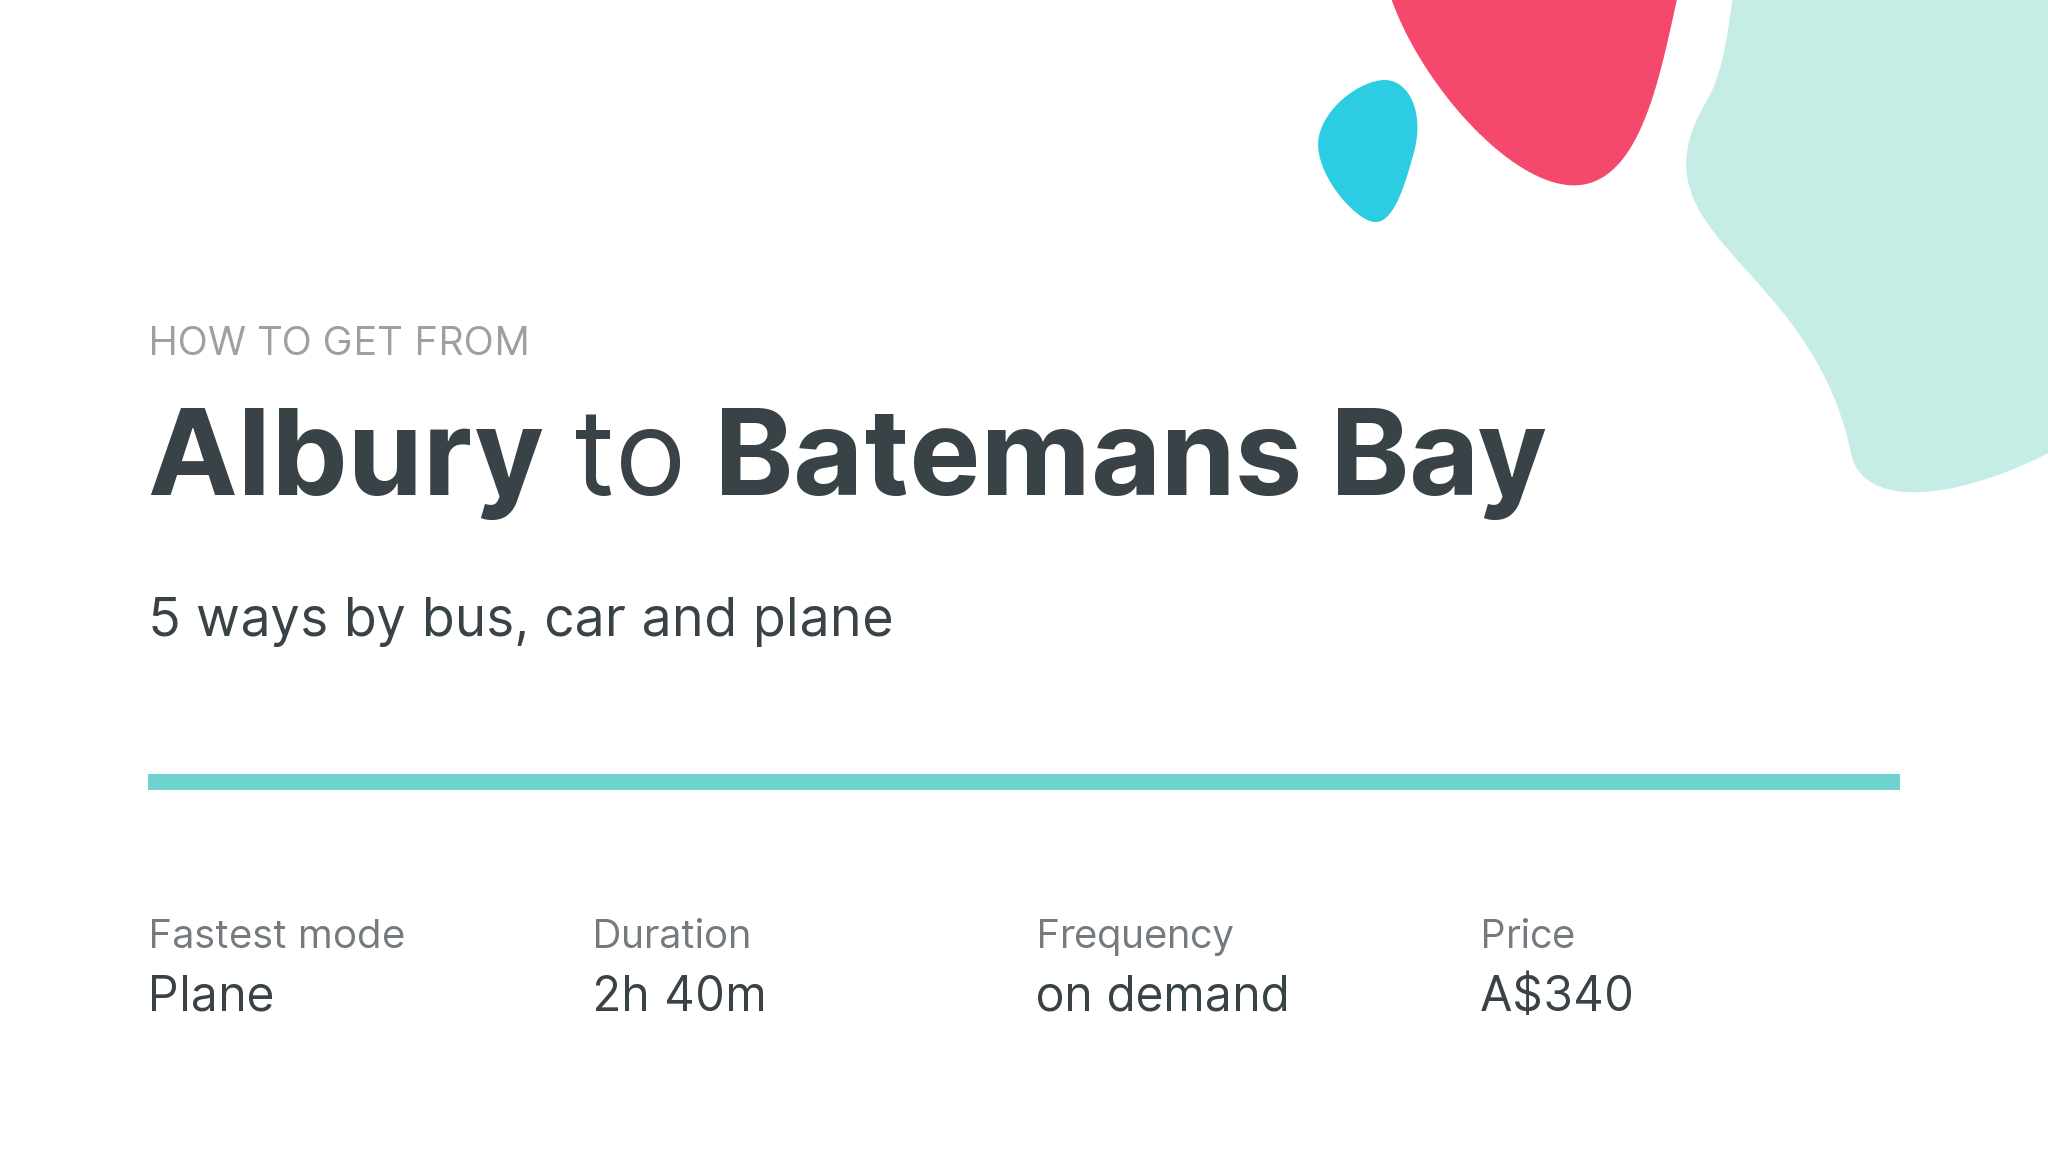 How do I get from Albury to Batemans Bay